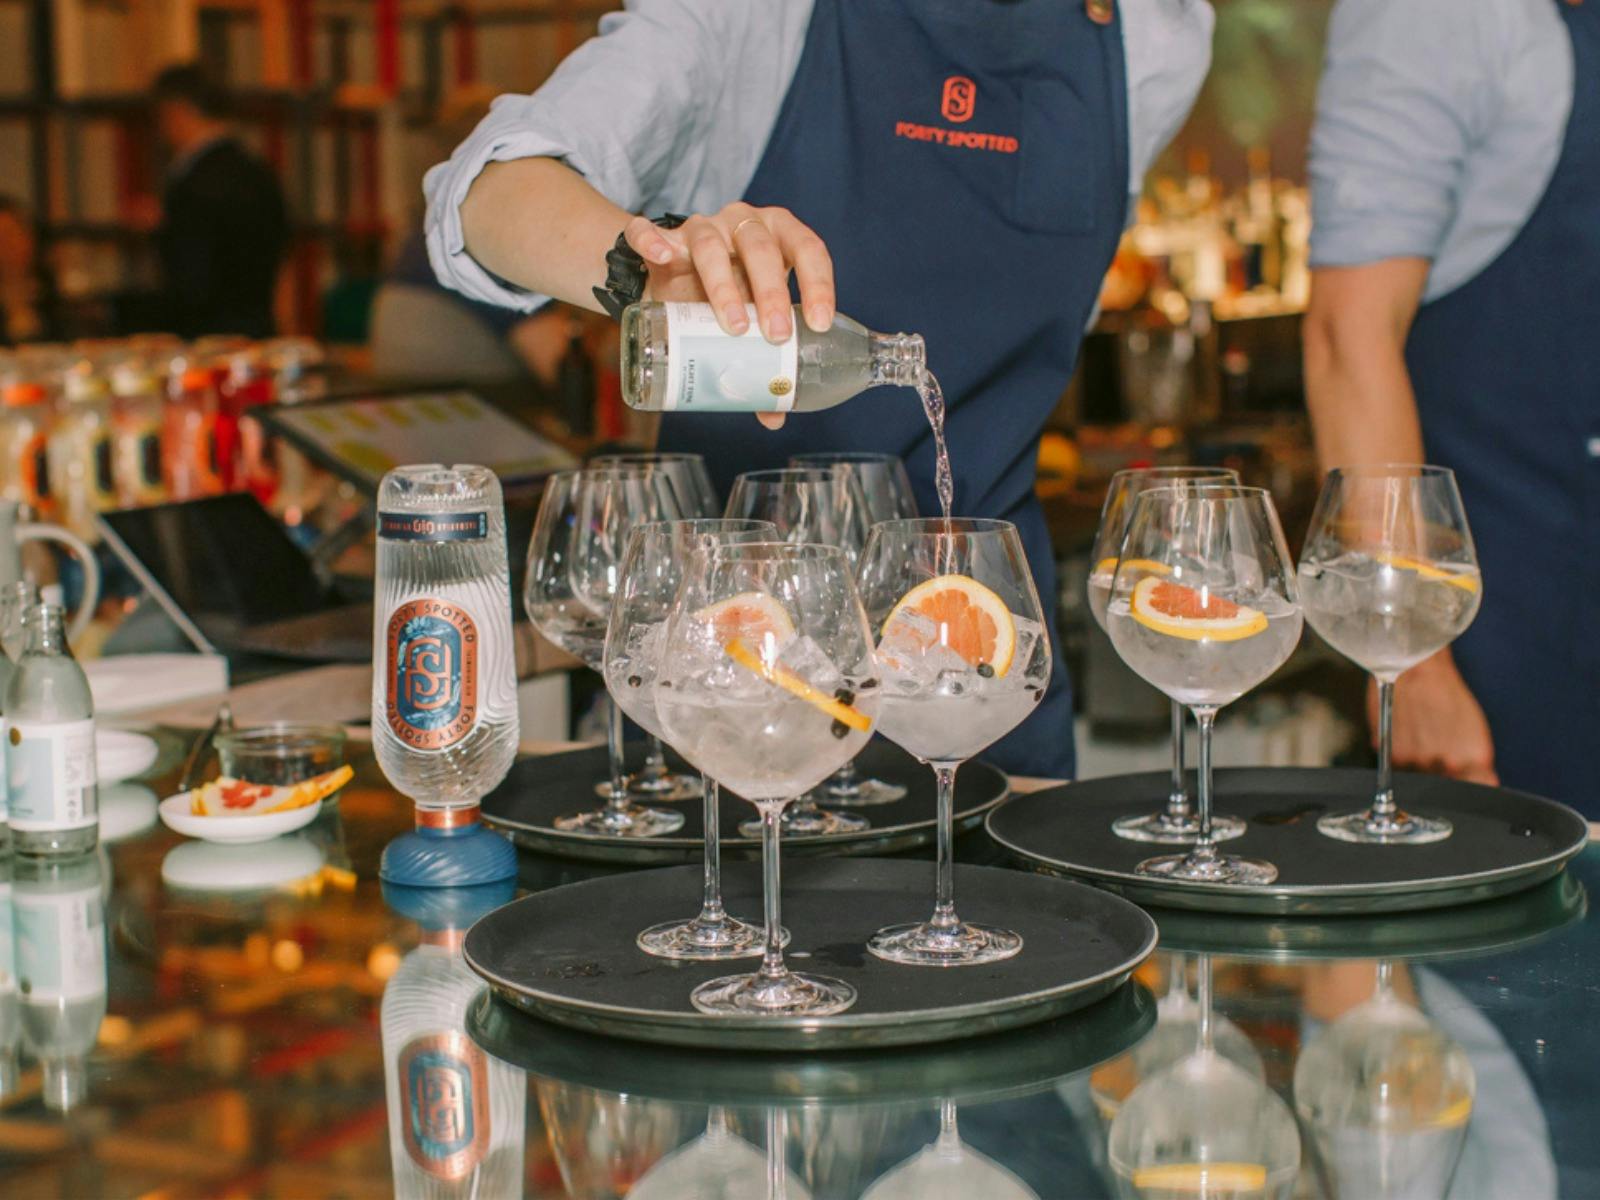 Bartender topping up glasses of Forty Spotted Gin with Tonic to be served